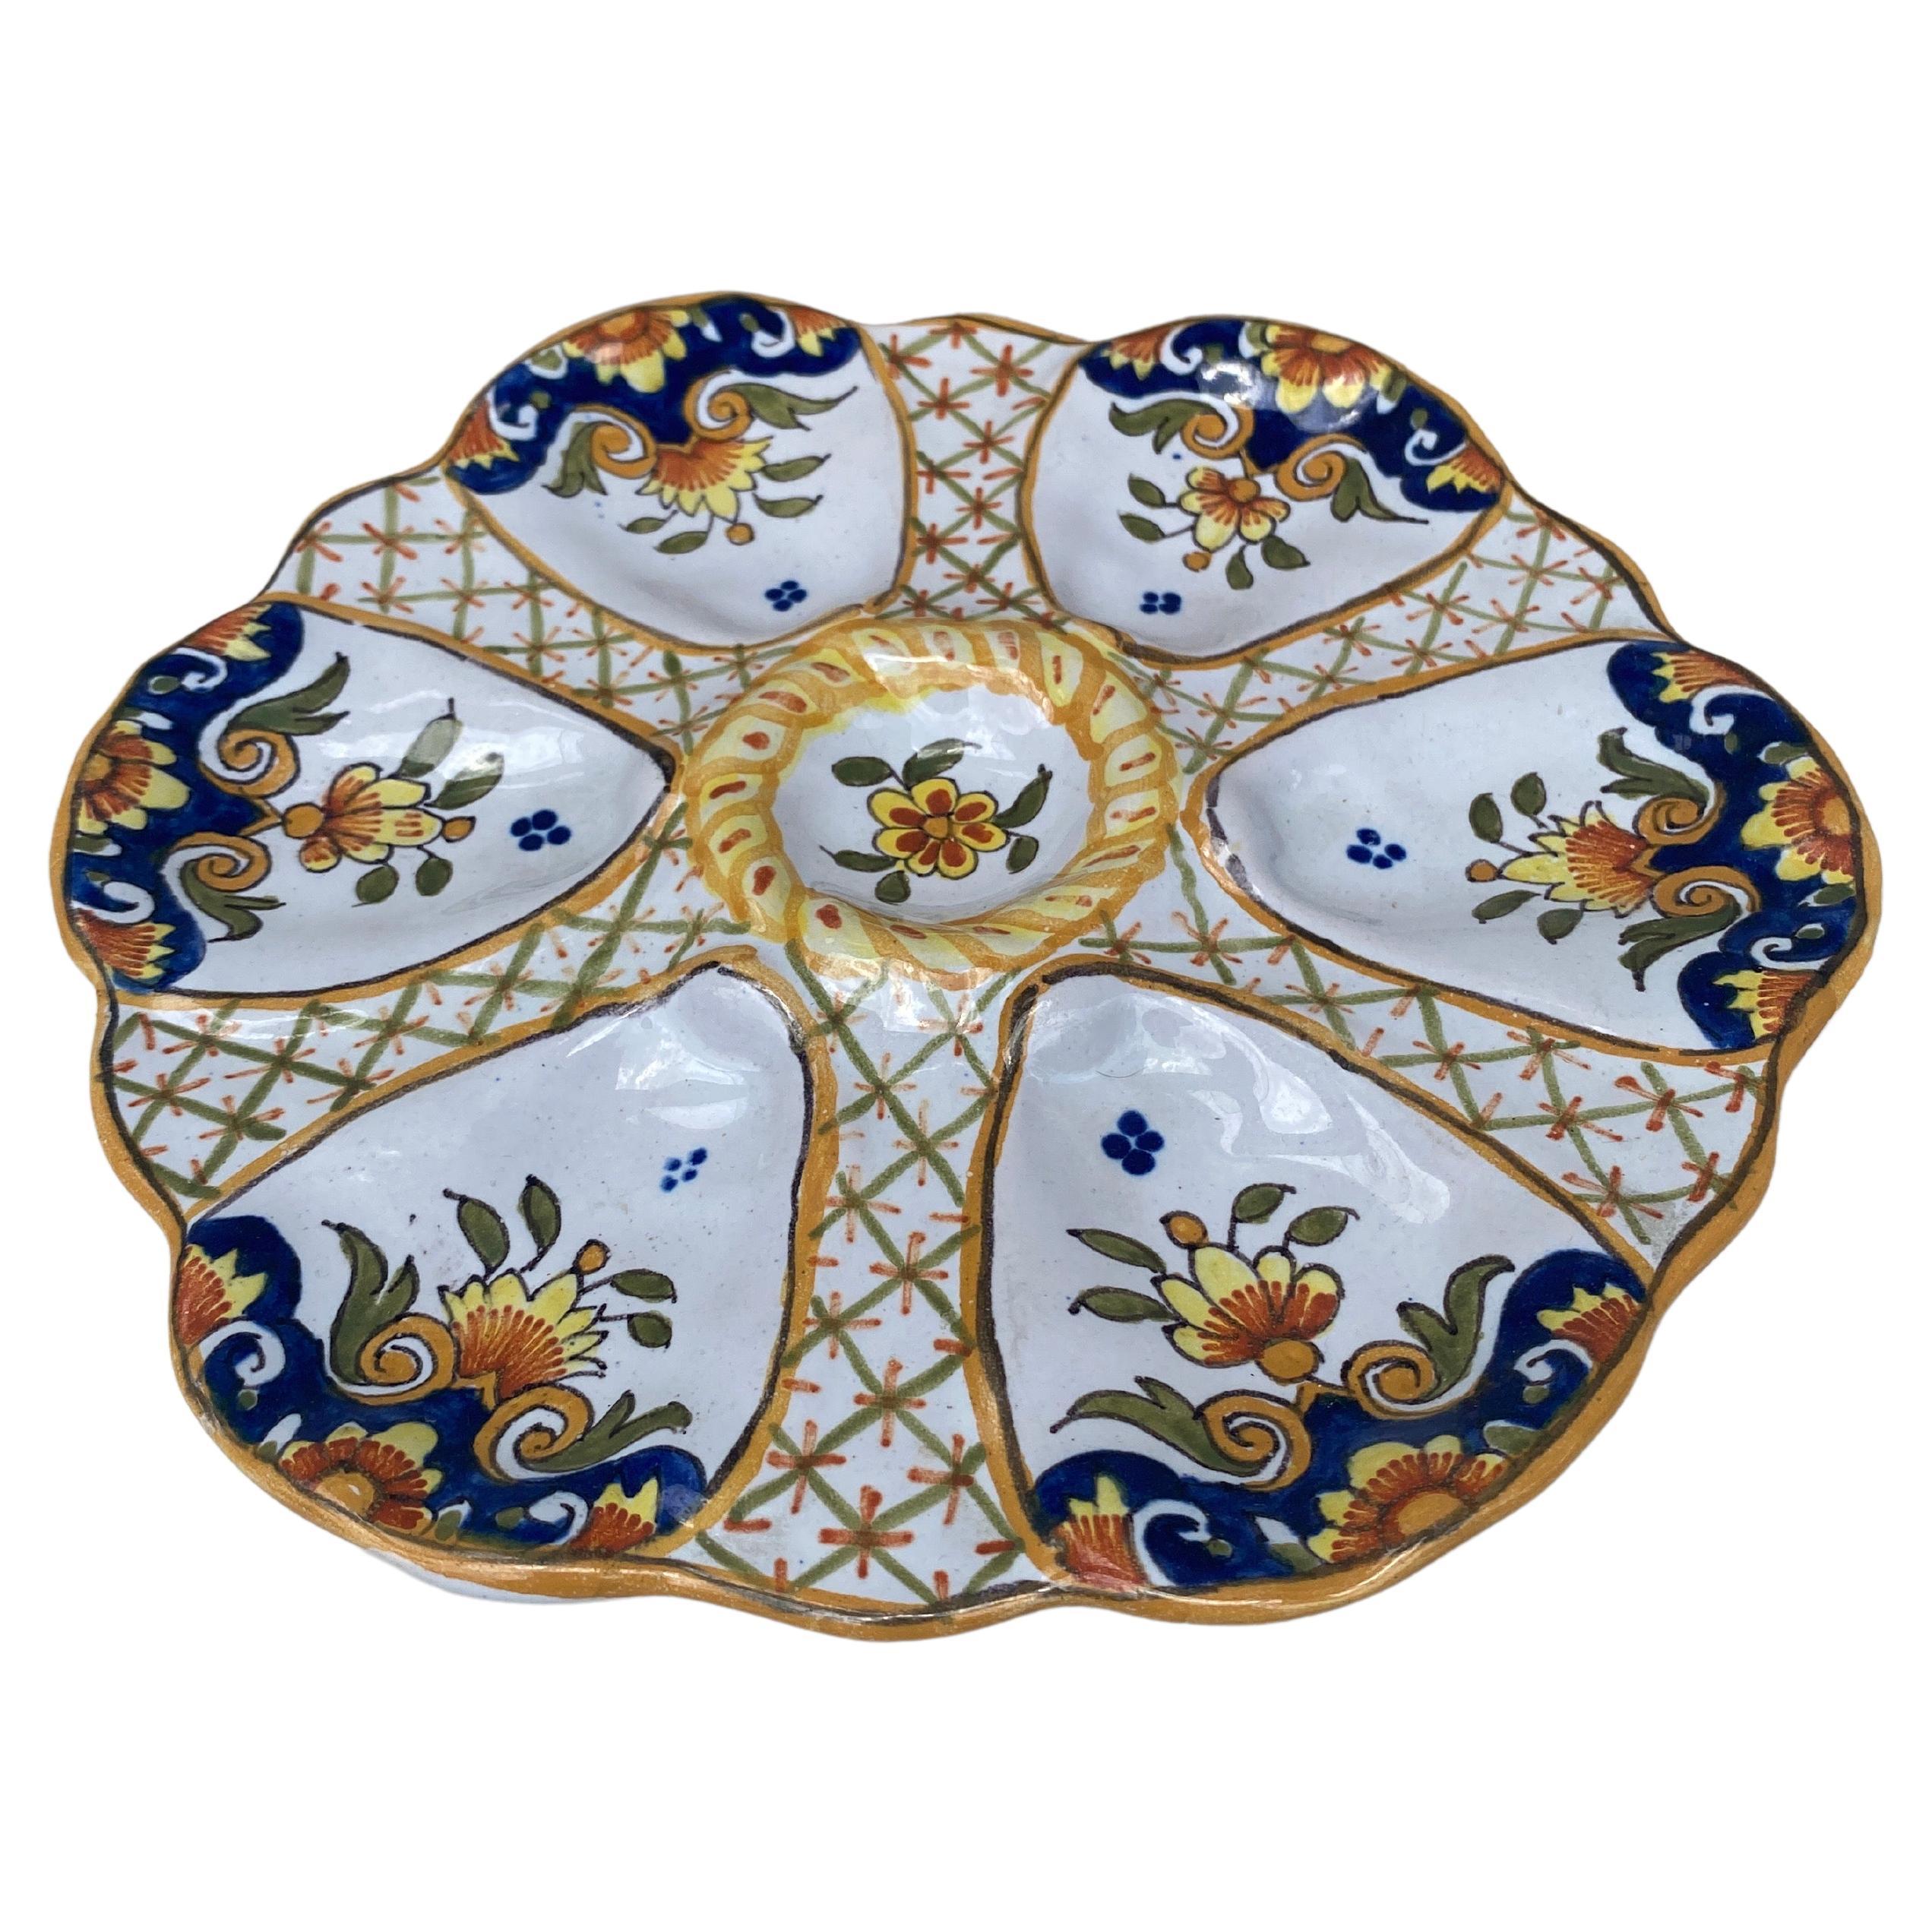 19th Century French Faience Oyster Plate.
Decorated with flowers , marked Bordeaux.